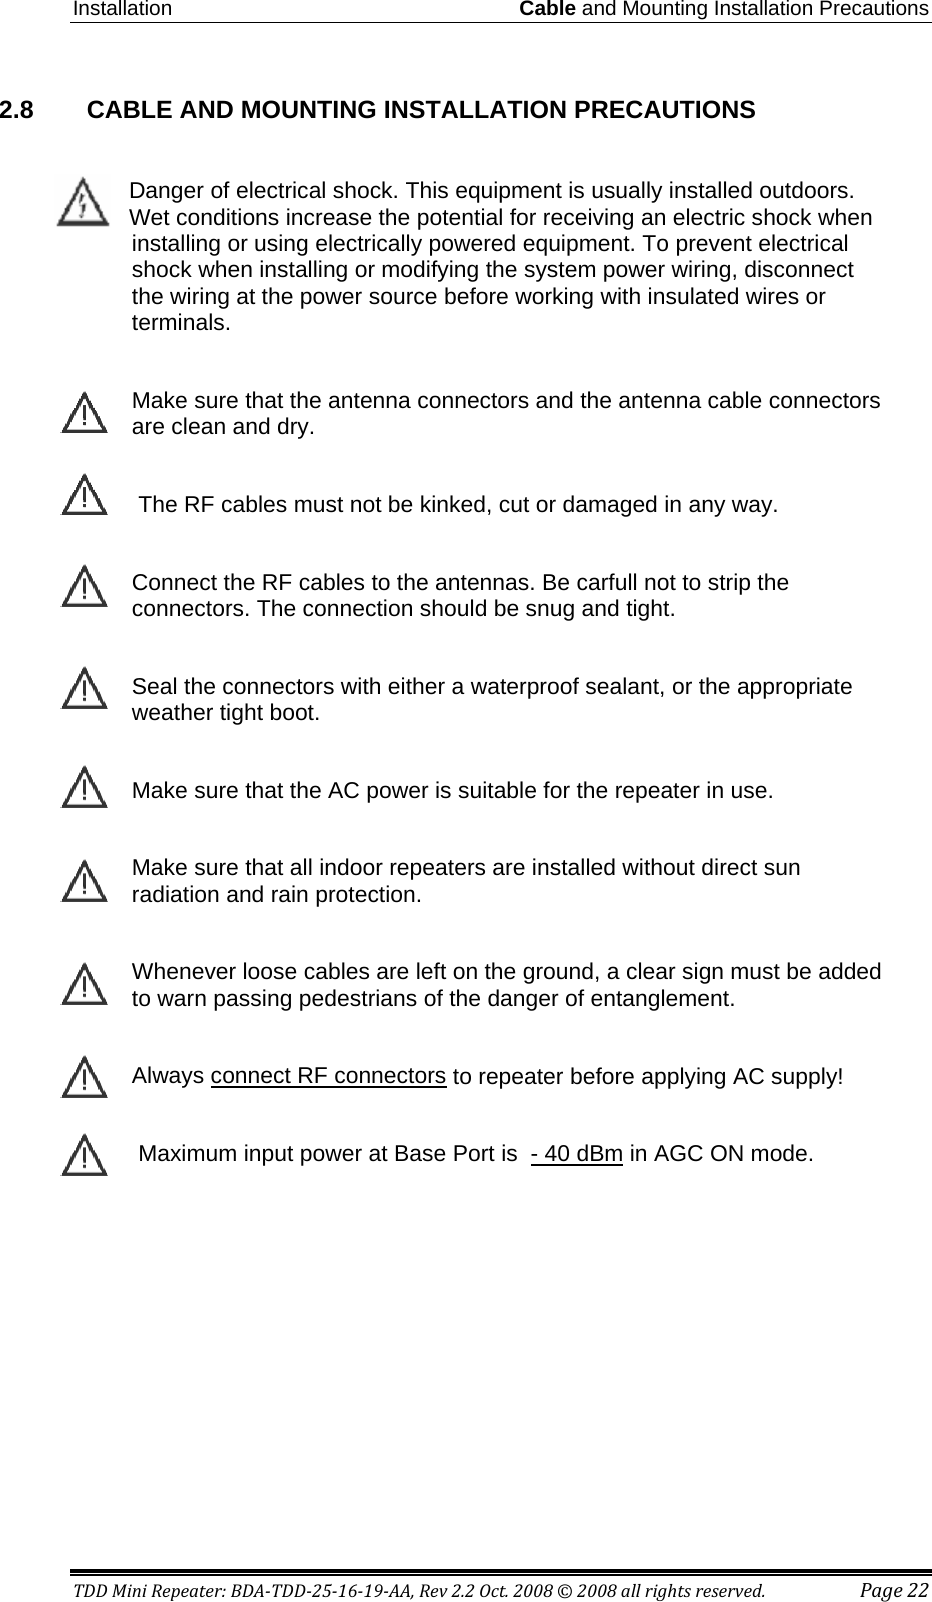 Installation Cable and Mounting Installation Precautions TDD Mini Repeater: BDA-TDD-25-16-19-AA, Rev 2.2 Oct. 2008 © 2008 all rights reserved. Page 22 2.8    CABLE AND MOUNTING INSTALLATION PRECAUTIONS  Danger of electrical shock. This equipment is usually installed outdoors. Wet conditions increase the potential for receiving an electric shock when installing or using electrically powered equipment. To prevent electrical shock when installing or modifying the system power wiring, disconnect the wiring at the power source before working with insulated wires or terminals.  Make sure that the antenna connectors and the antenna cable connectors are clean and dry.   The RF cables must not be kinked, cut or damaged in any way.  Connect the RF cables to the antennas. Be carfull not to strip the connectors. The connection should be snug and tight.  Seal the connectors with either a waterproof sealant, or the appropriate weather tight boot.  Make sure that the AC power is suitable for the repeater in use.  Make sure that all indoor repeaters are installed without direct sun radiation and rain protection.  Whenever loose cables are left on the ground, a clear sign must be added to warn passing pedestrians of the danger of entanglement.   Always connect RF connectors to repeater before applying AC supply!       Maximum input power at Base Port is  - 40 dBm in AGC ON mode.  